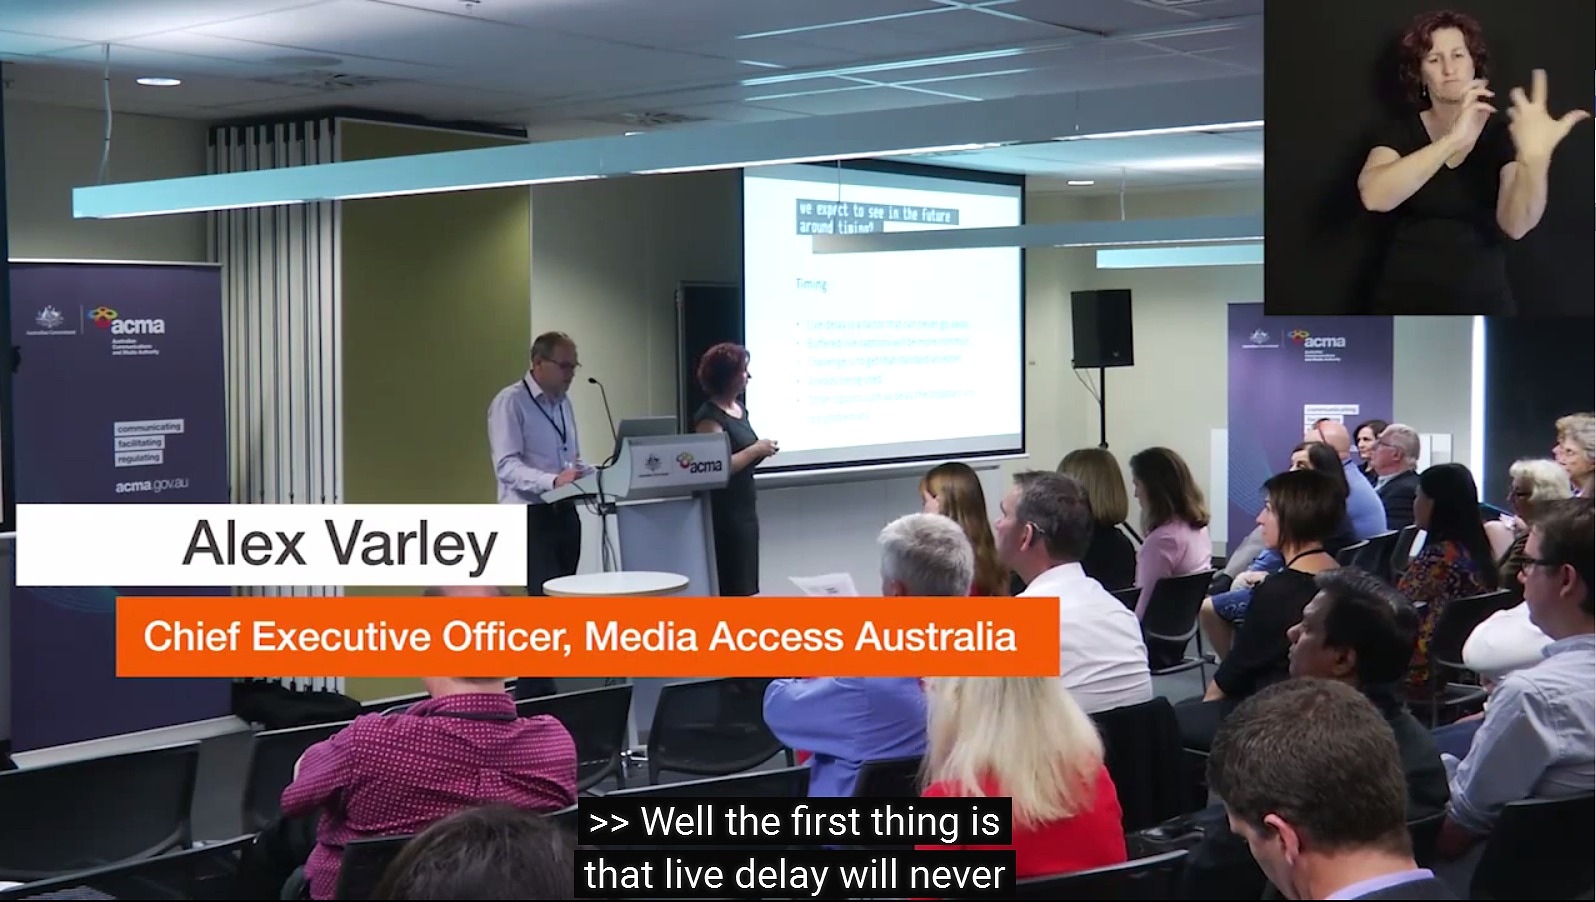 Alex Varley, Chief Executive Officer, Media Access Australia presenting at the ACMA Citizen Conversation on live captioning. Image credit: Highlights from ‘Live captioning: let’s talk’, part of the Citizen Conversation series